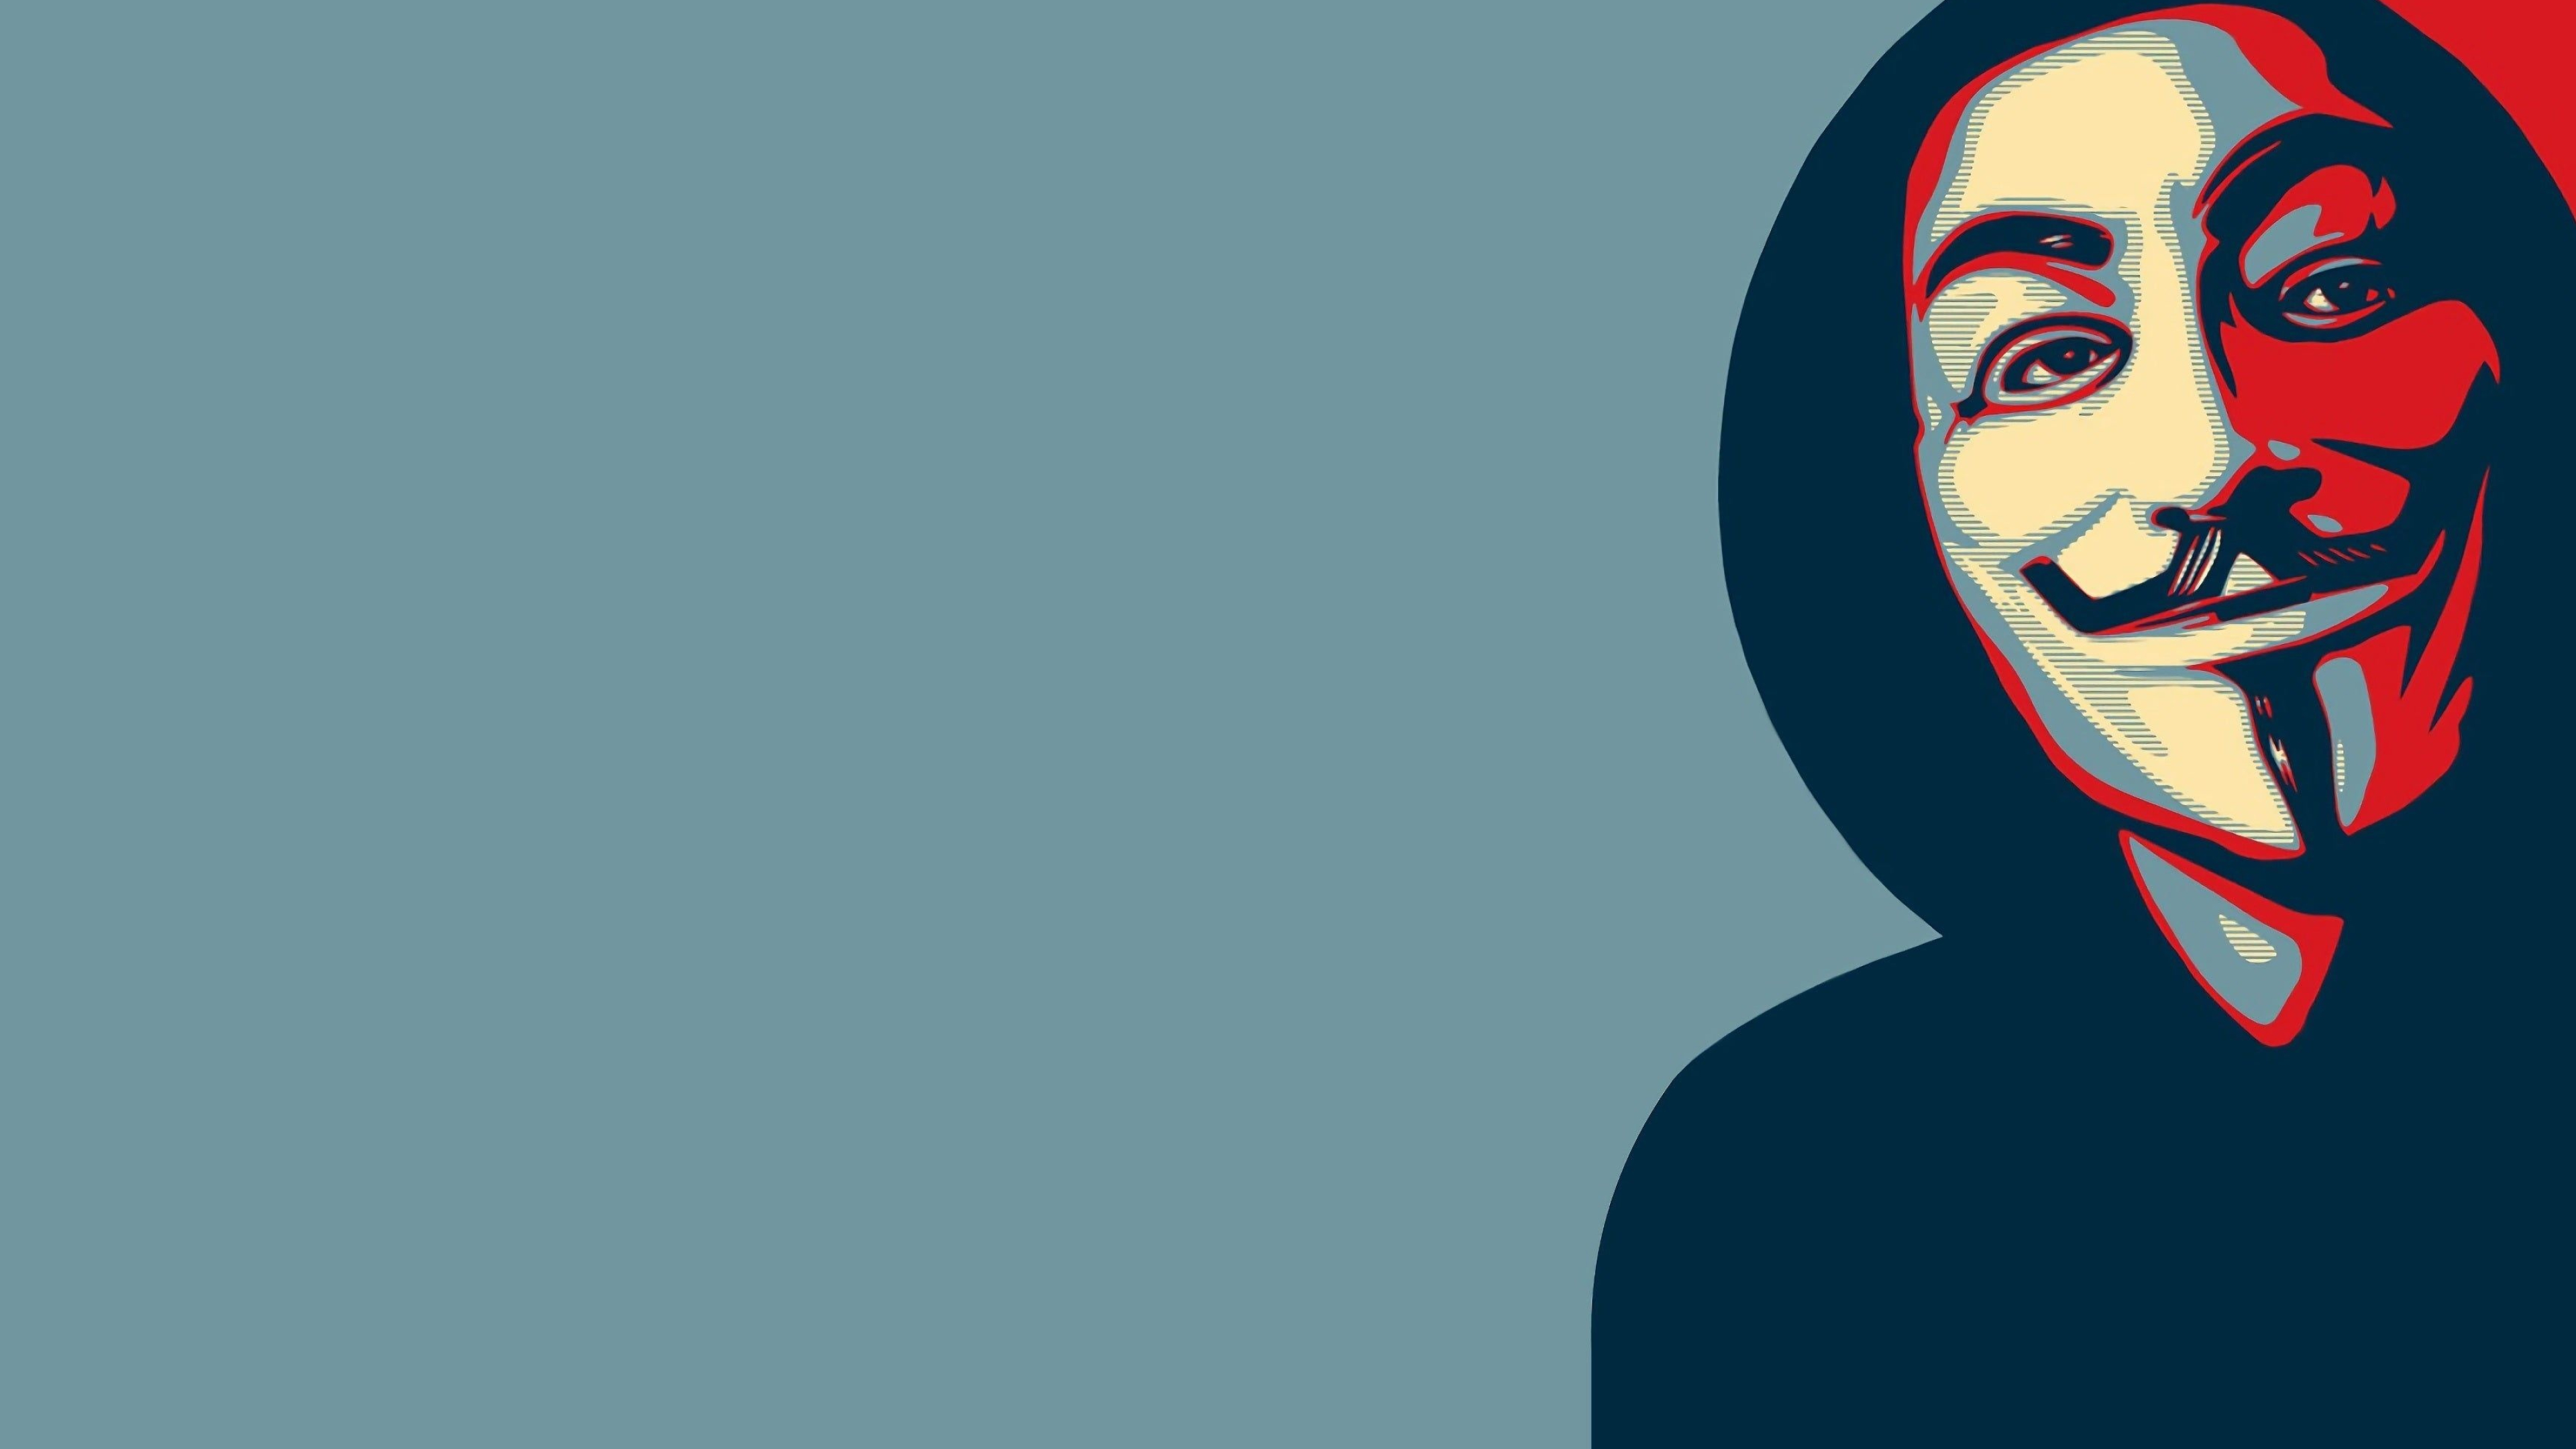 Guy Fawkes Mask: Anonymous, a decentralized international activist and hacktivist collective. 3840x2160 4K Background.